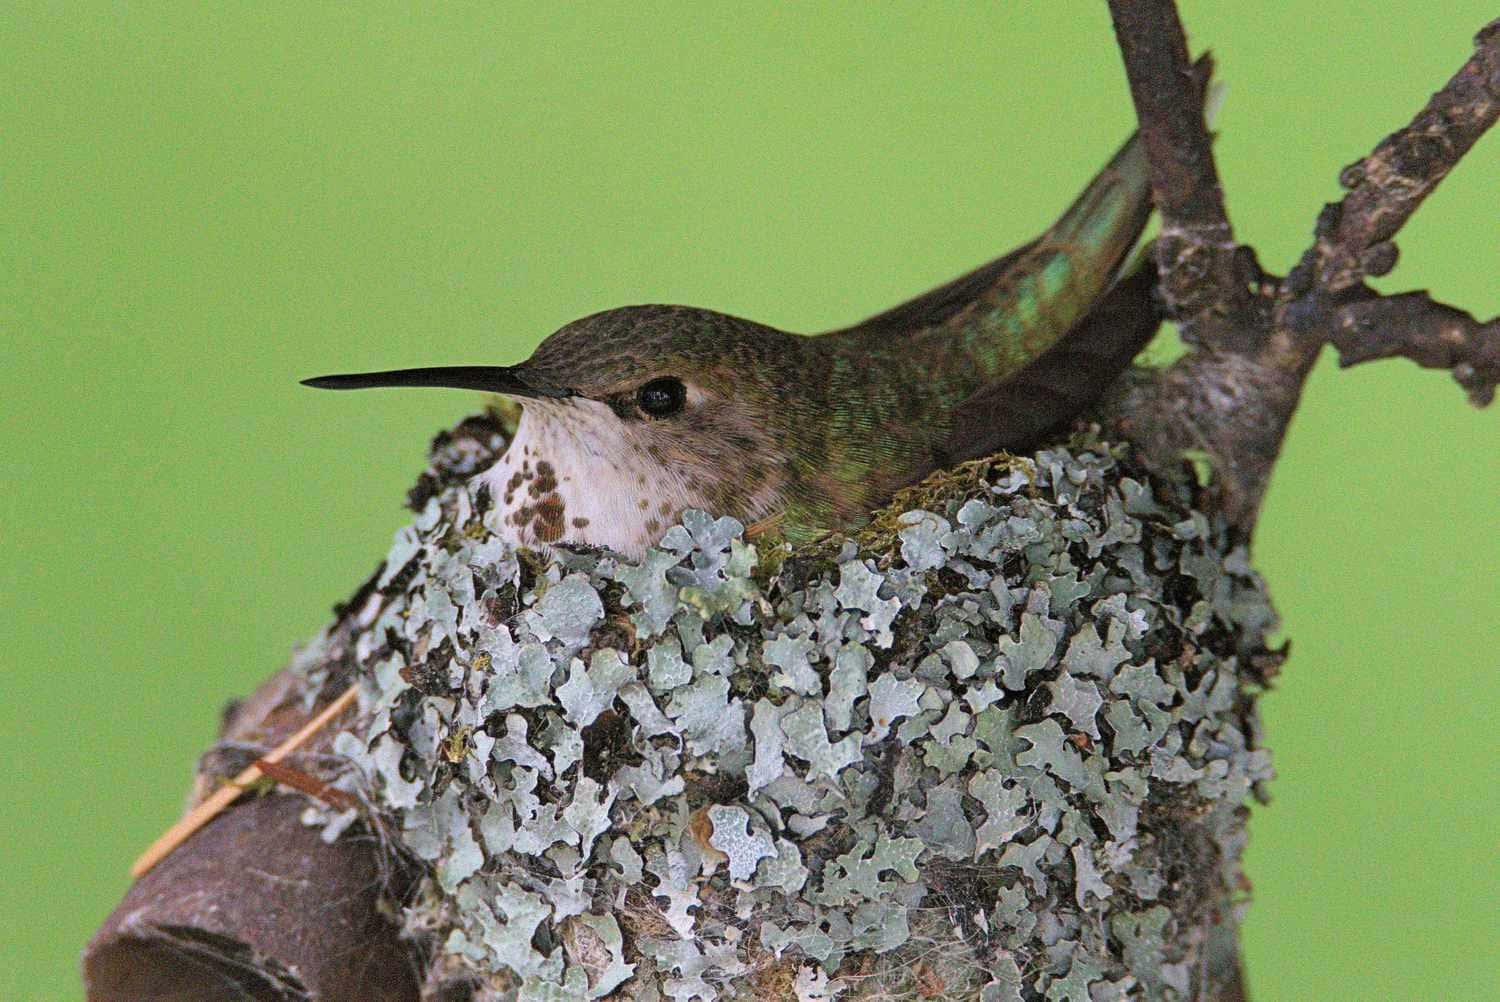 A Baby Hummingbird in its Nest